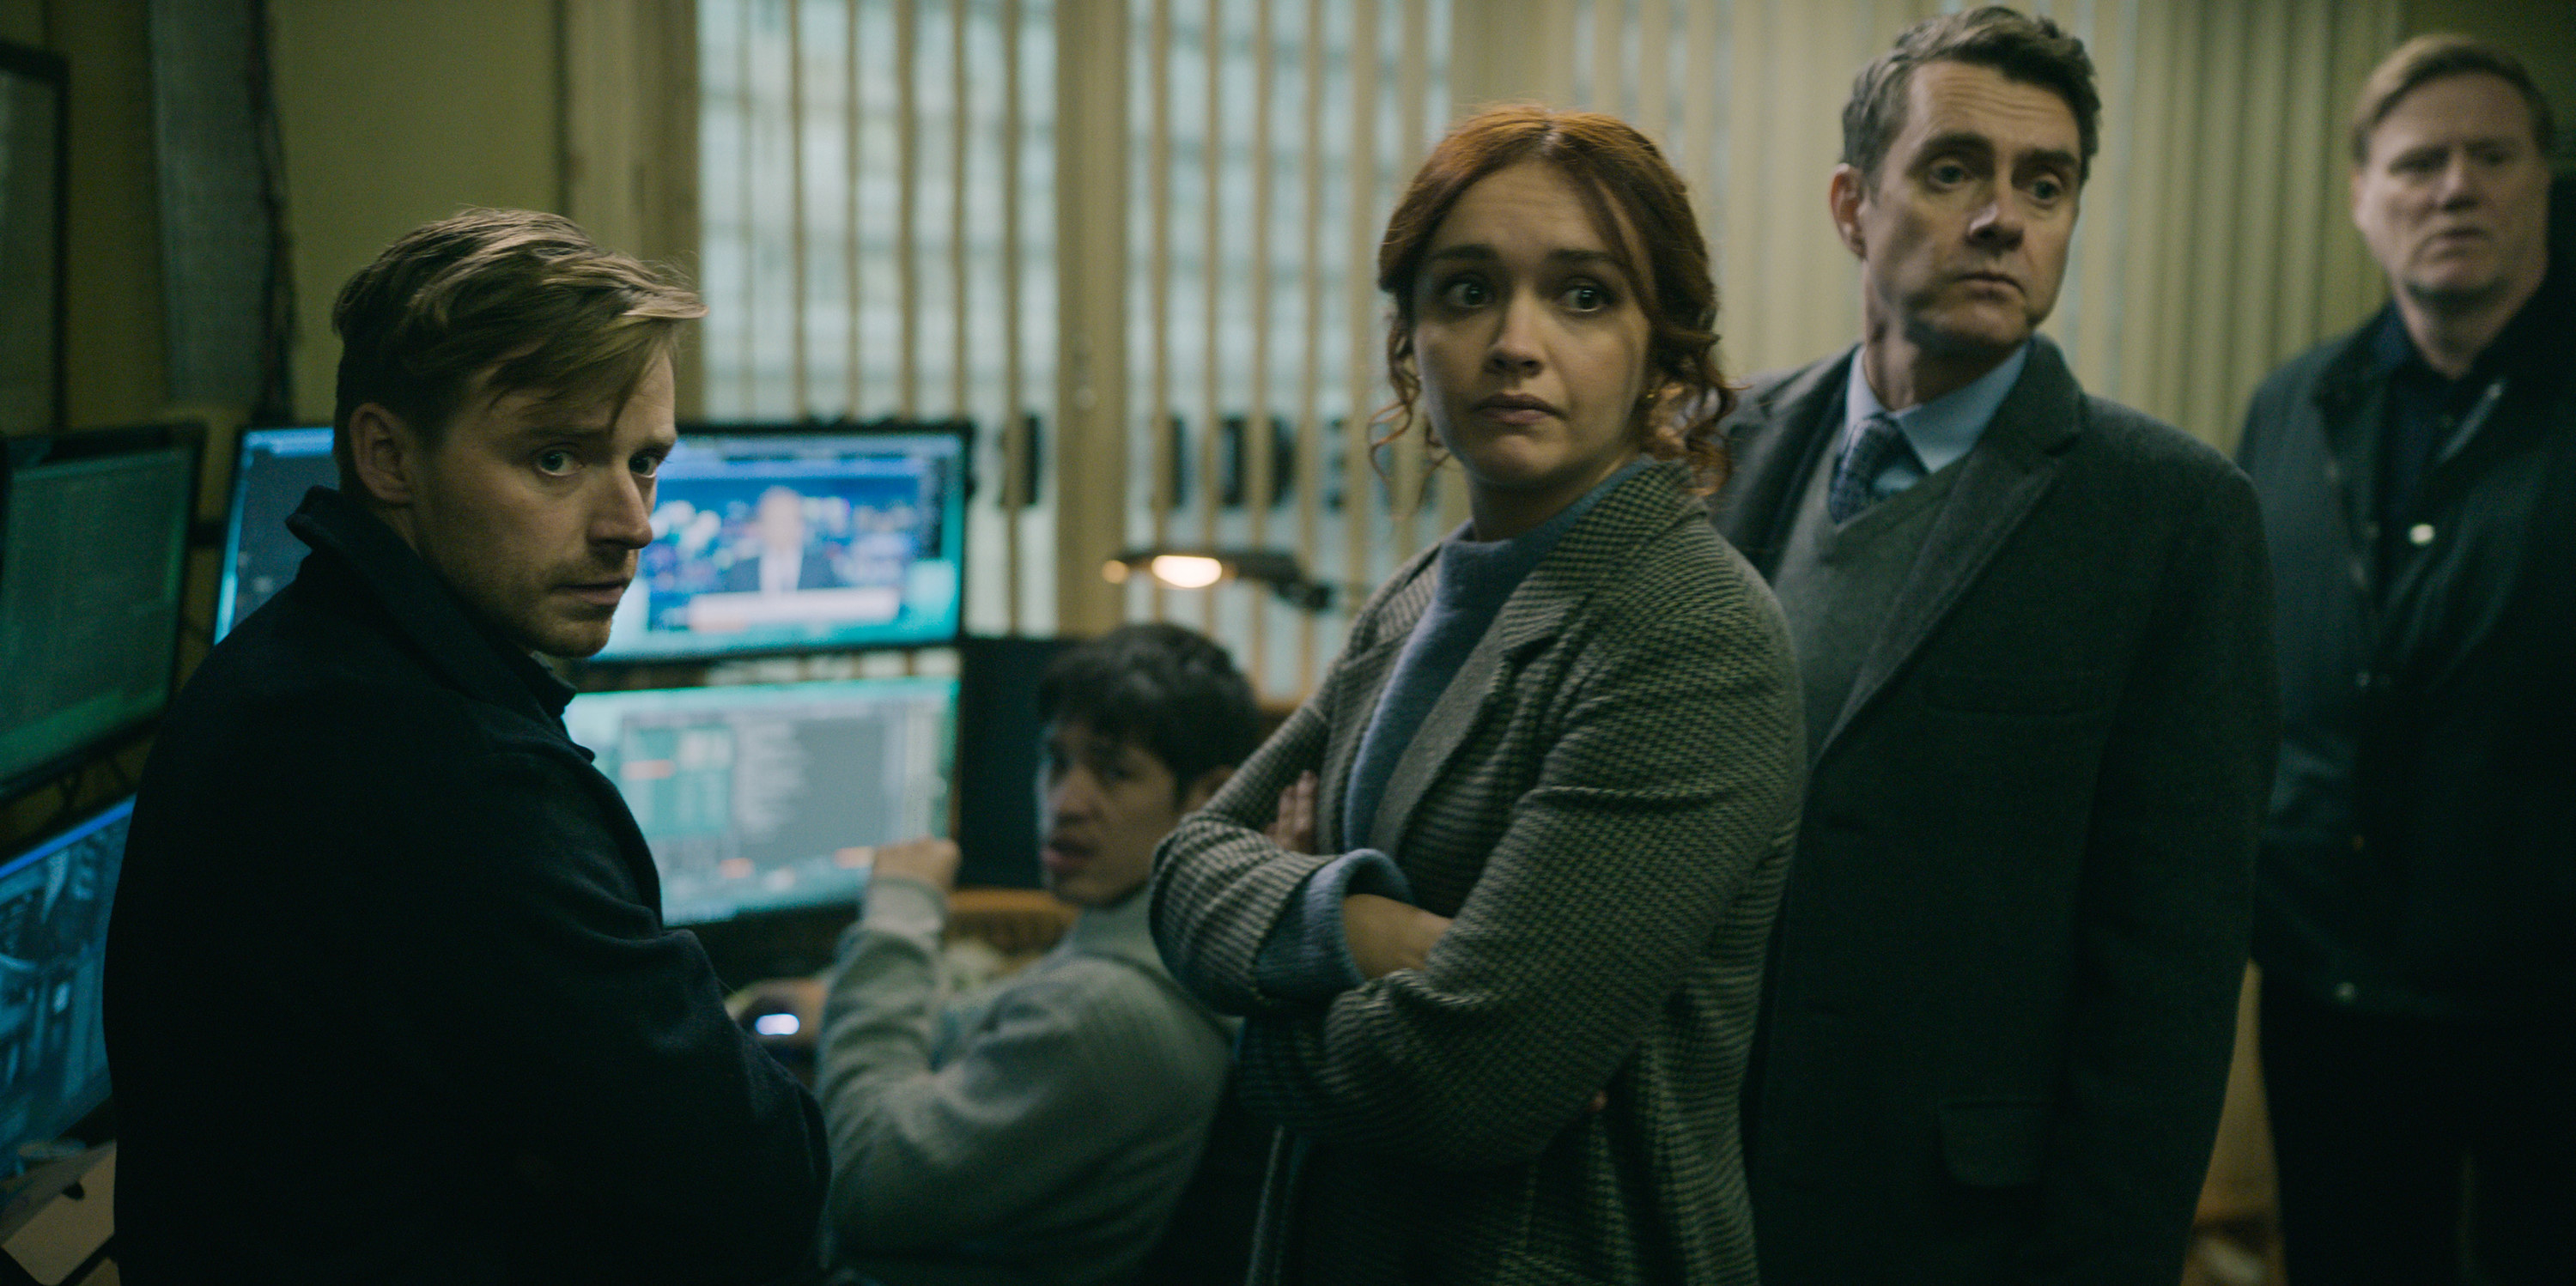 Jack Lowden, Olivia Cooke, and Paul Higgins stand around a computer